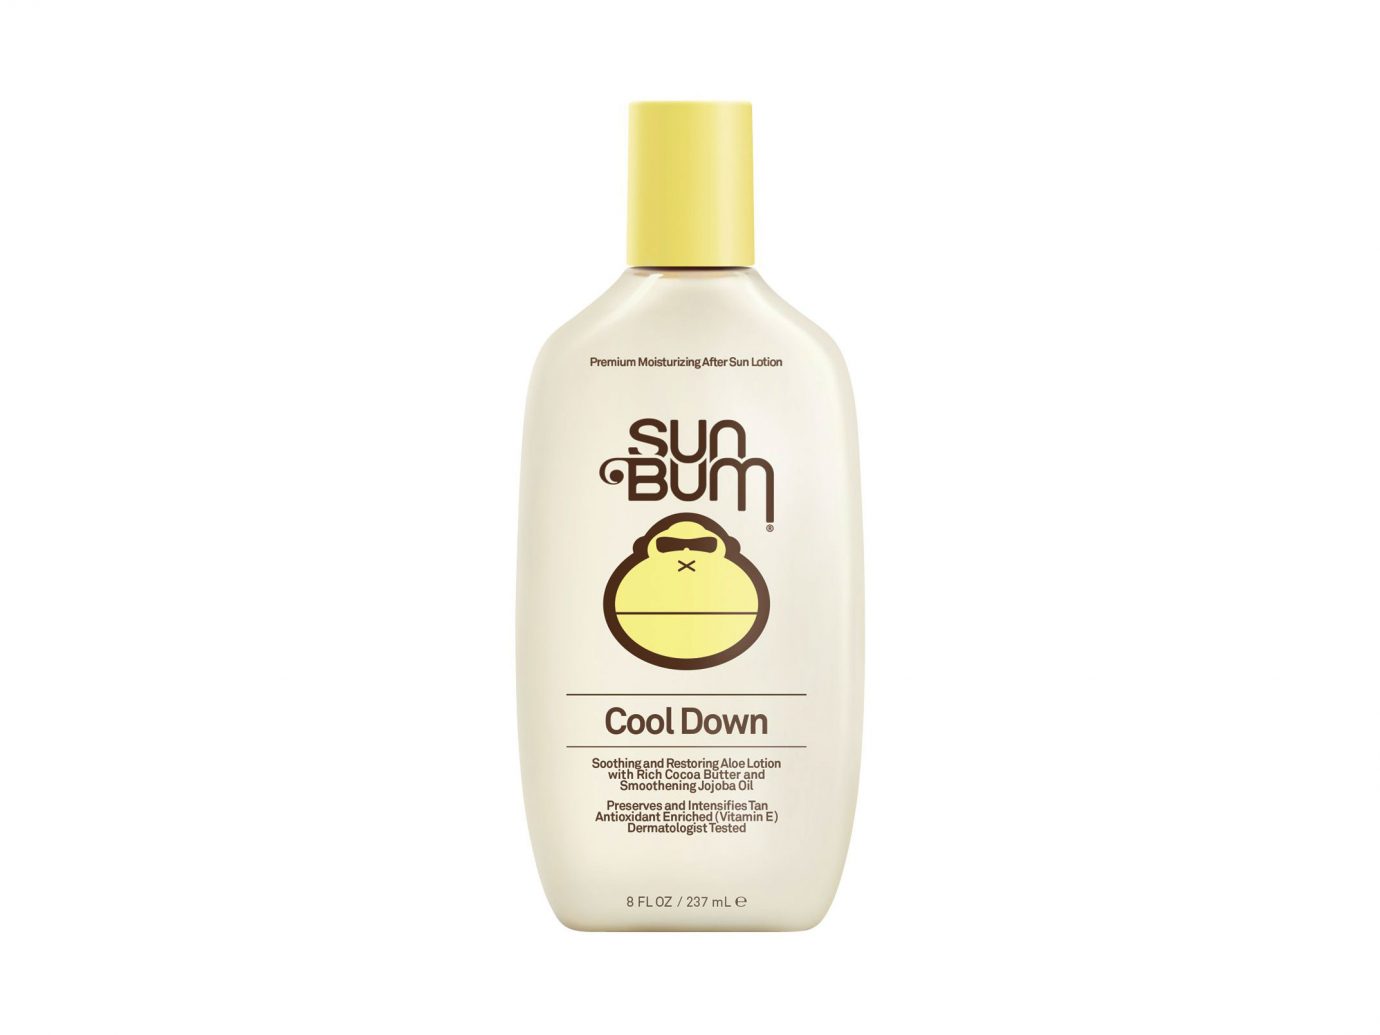 Sun bum Soothing after-sun lotion